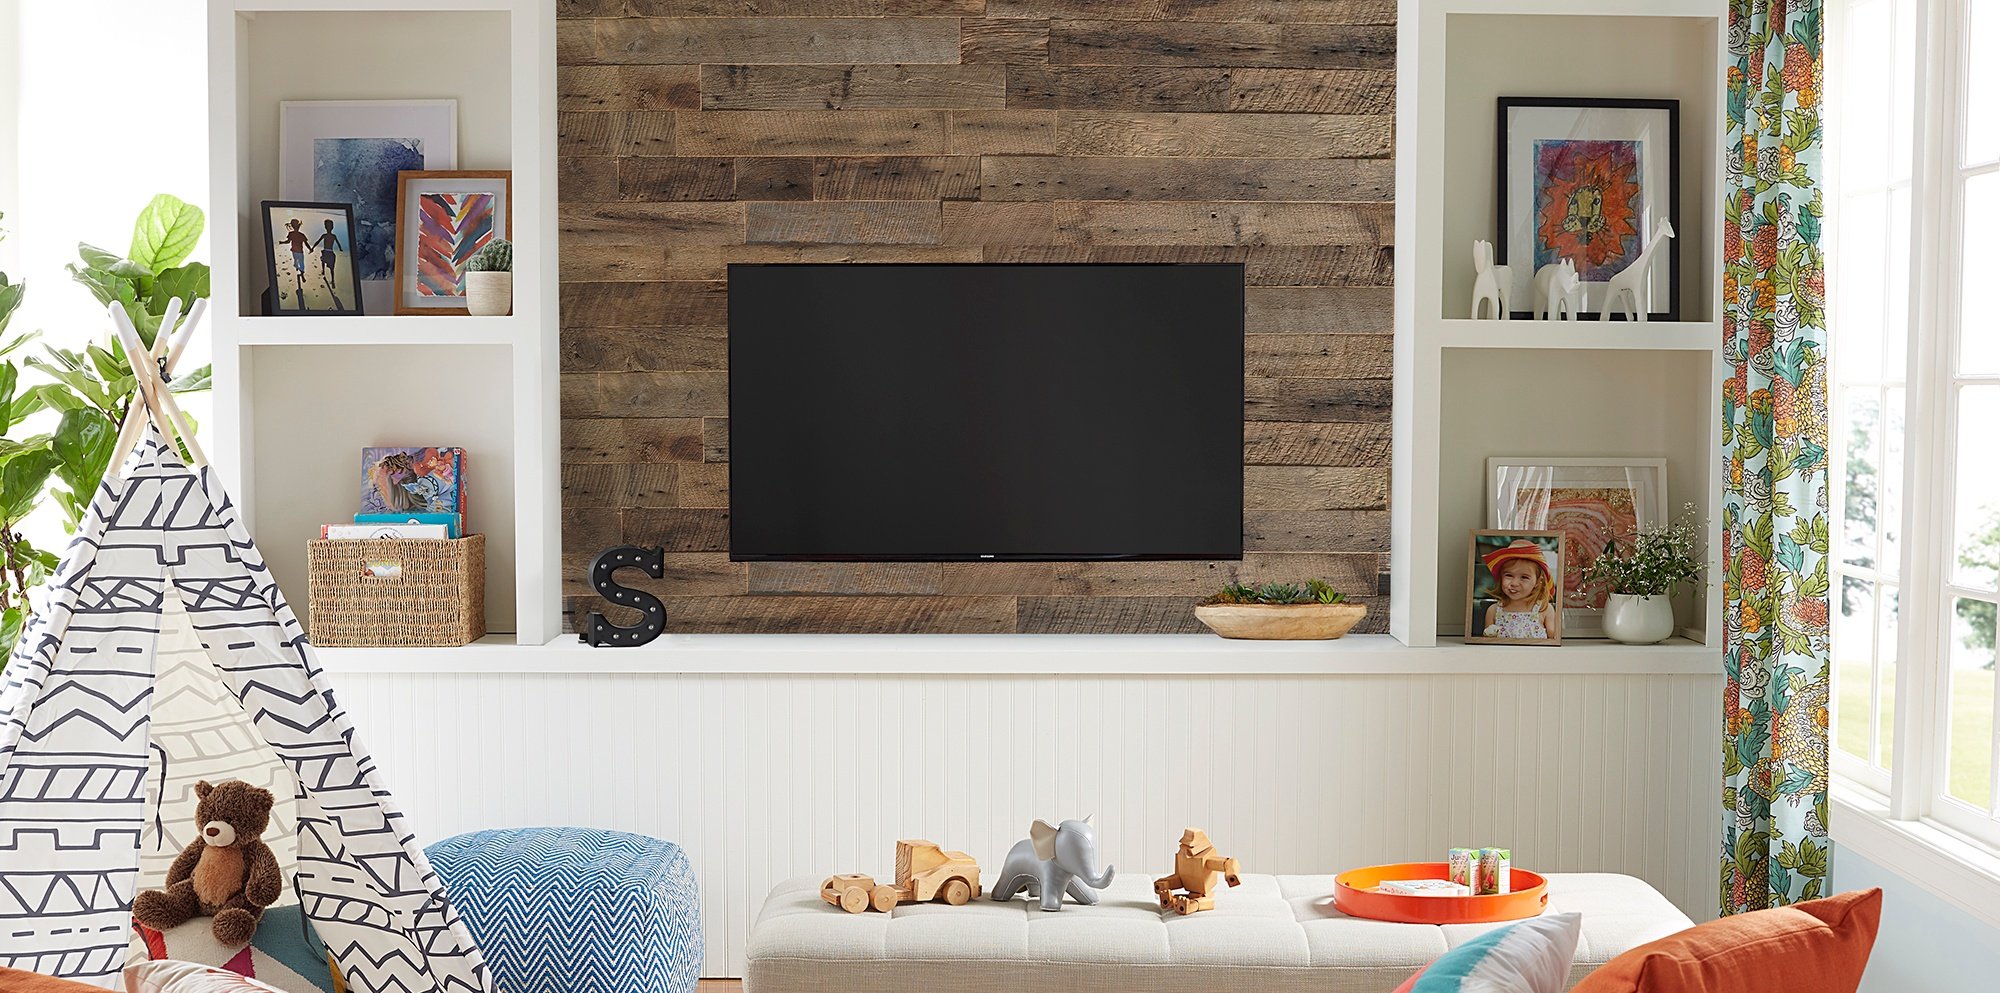 What Would Joanna Do? How To Mount Your Tv On Shiplap Kenya